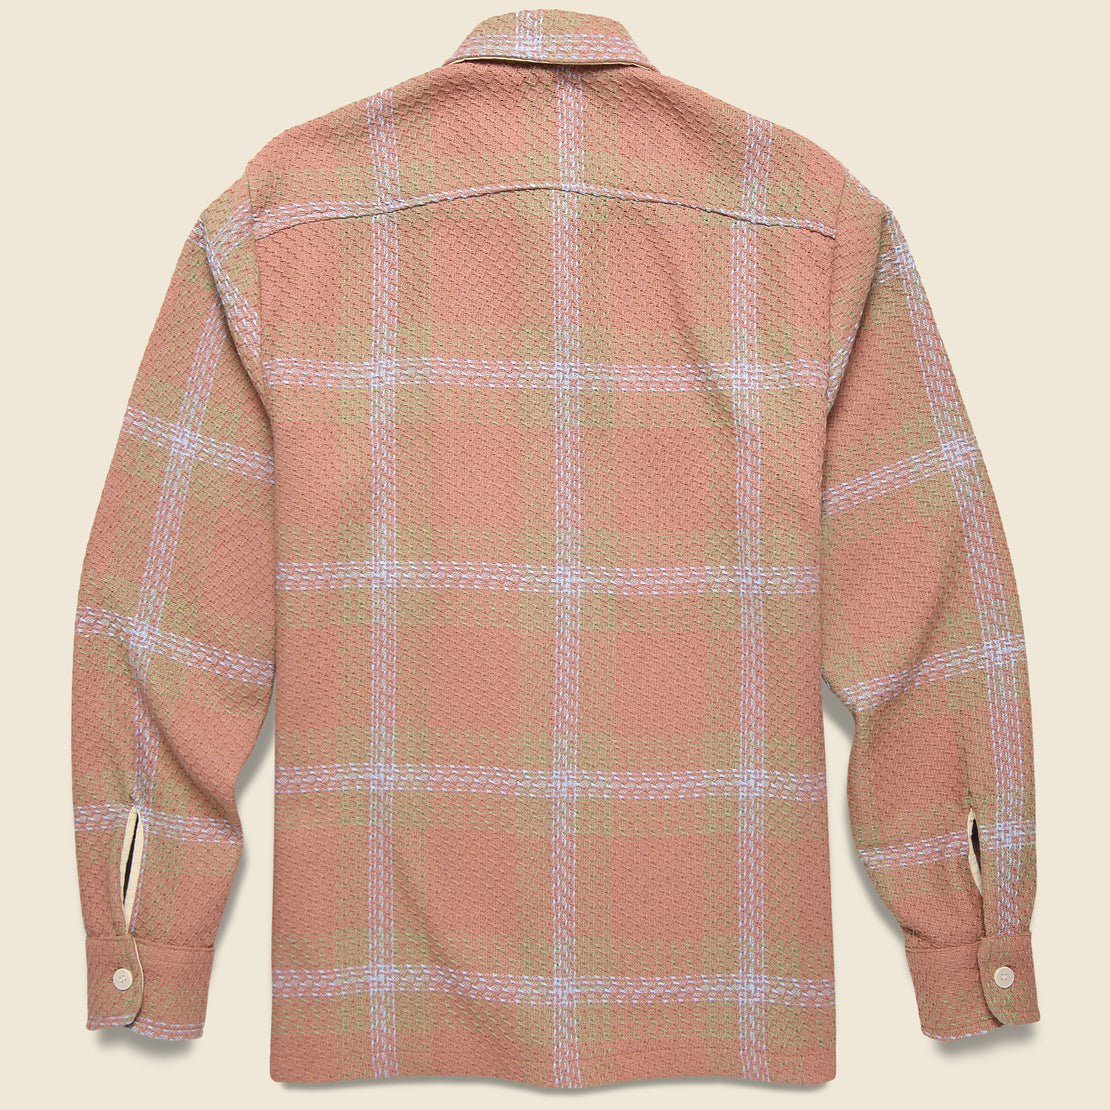 Mio Whiting Overshirt - Pink/Blue - Wax London - STAG Provisions - Tops - L/S Woven - Plaid